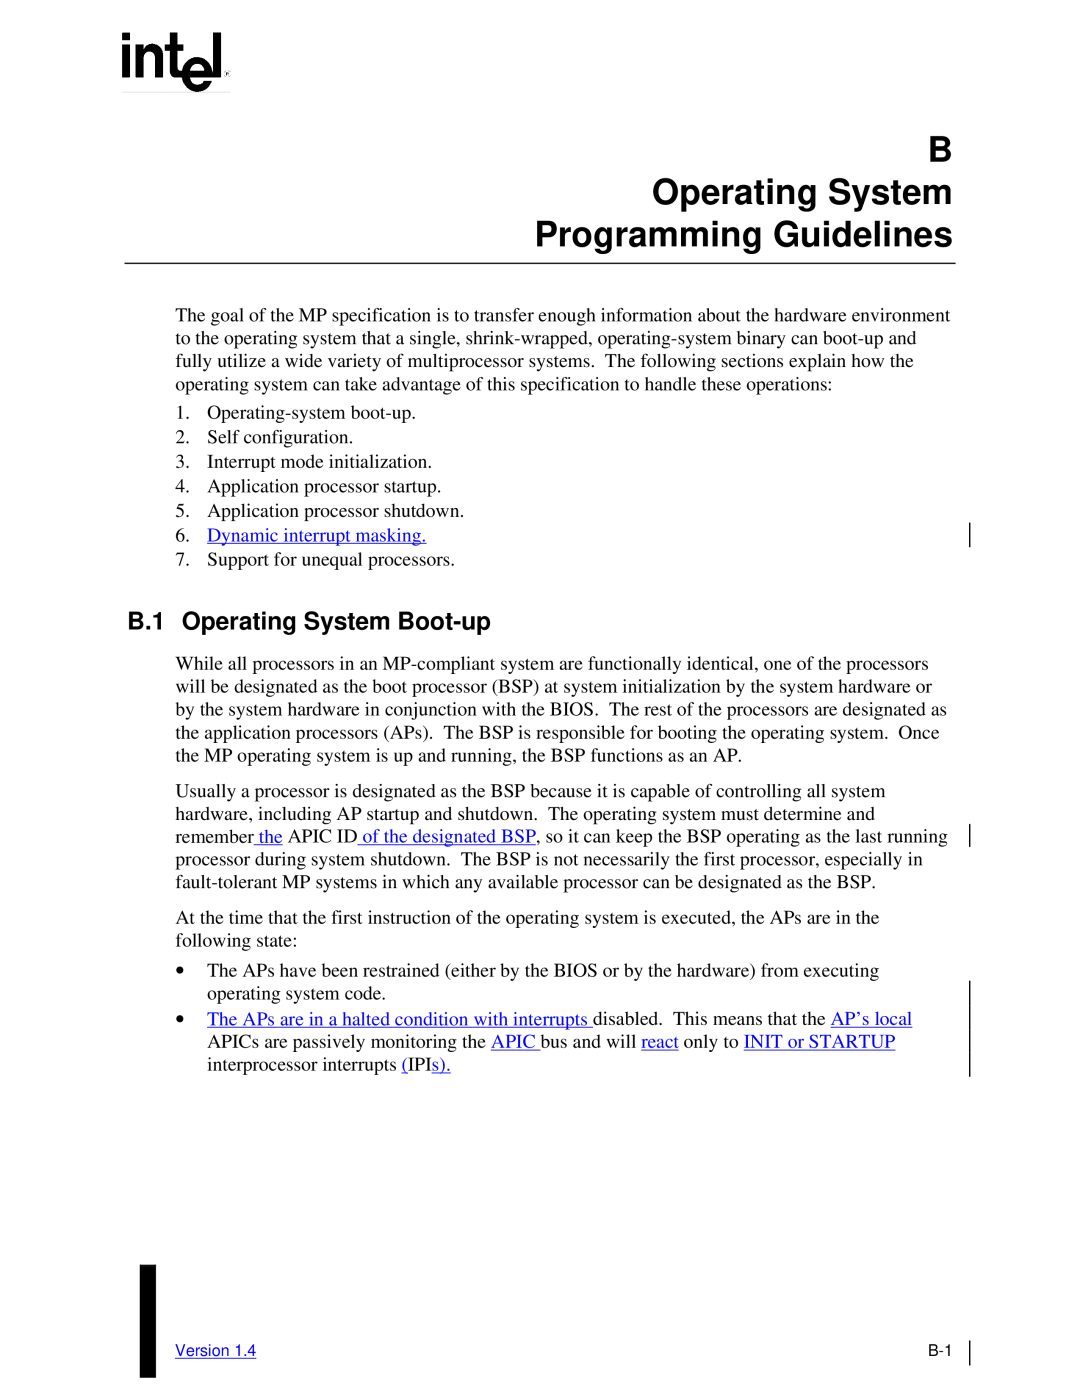 Intel MultiProcessor manual B Operating System Programming Guidelines, B.1 Operating System Boot-up 